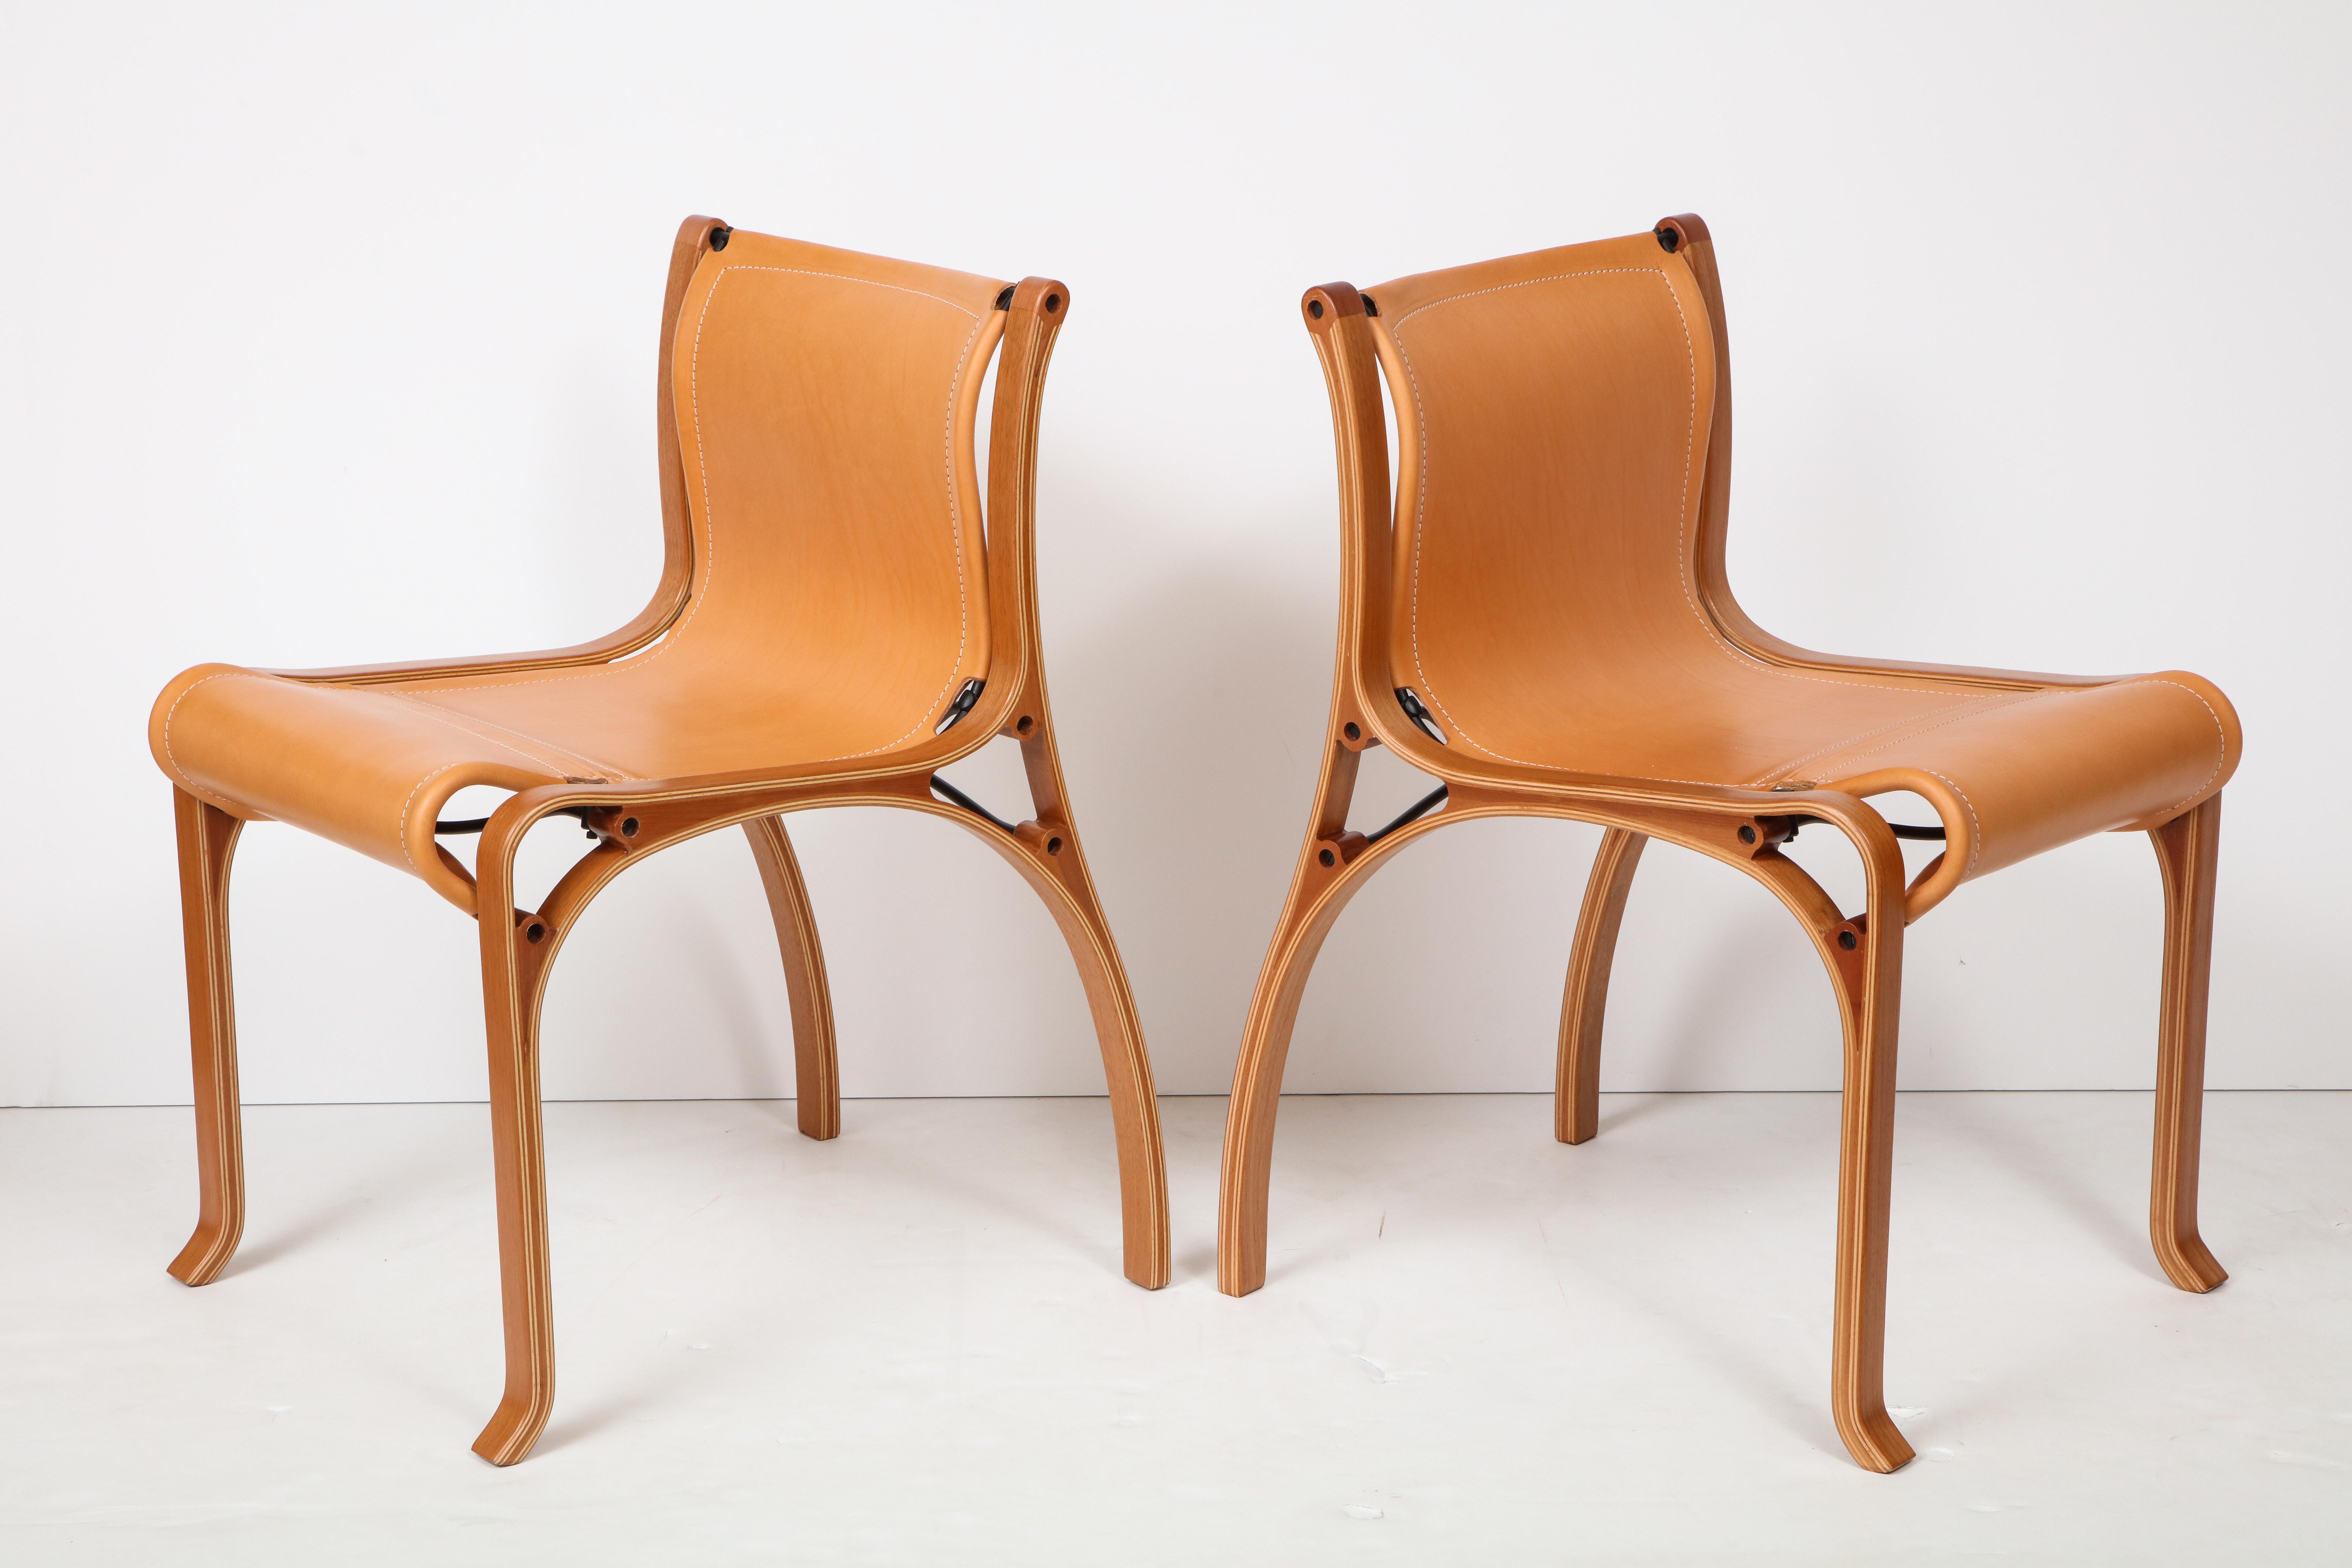 Minimalist Ten Saddle Stitched Leather Dining Chairs